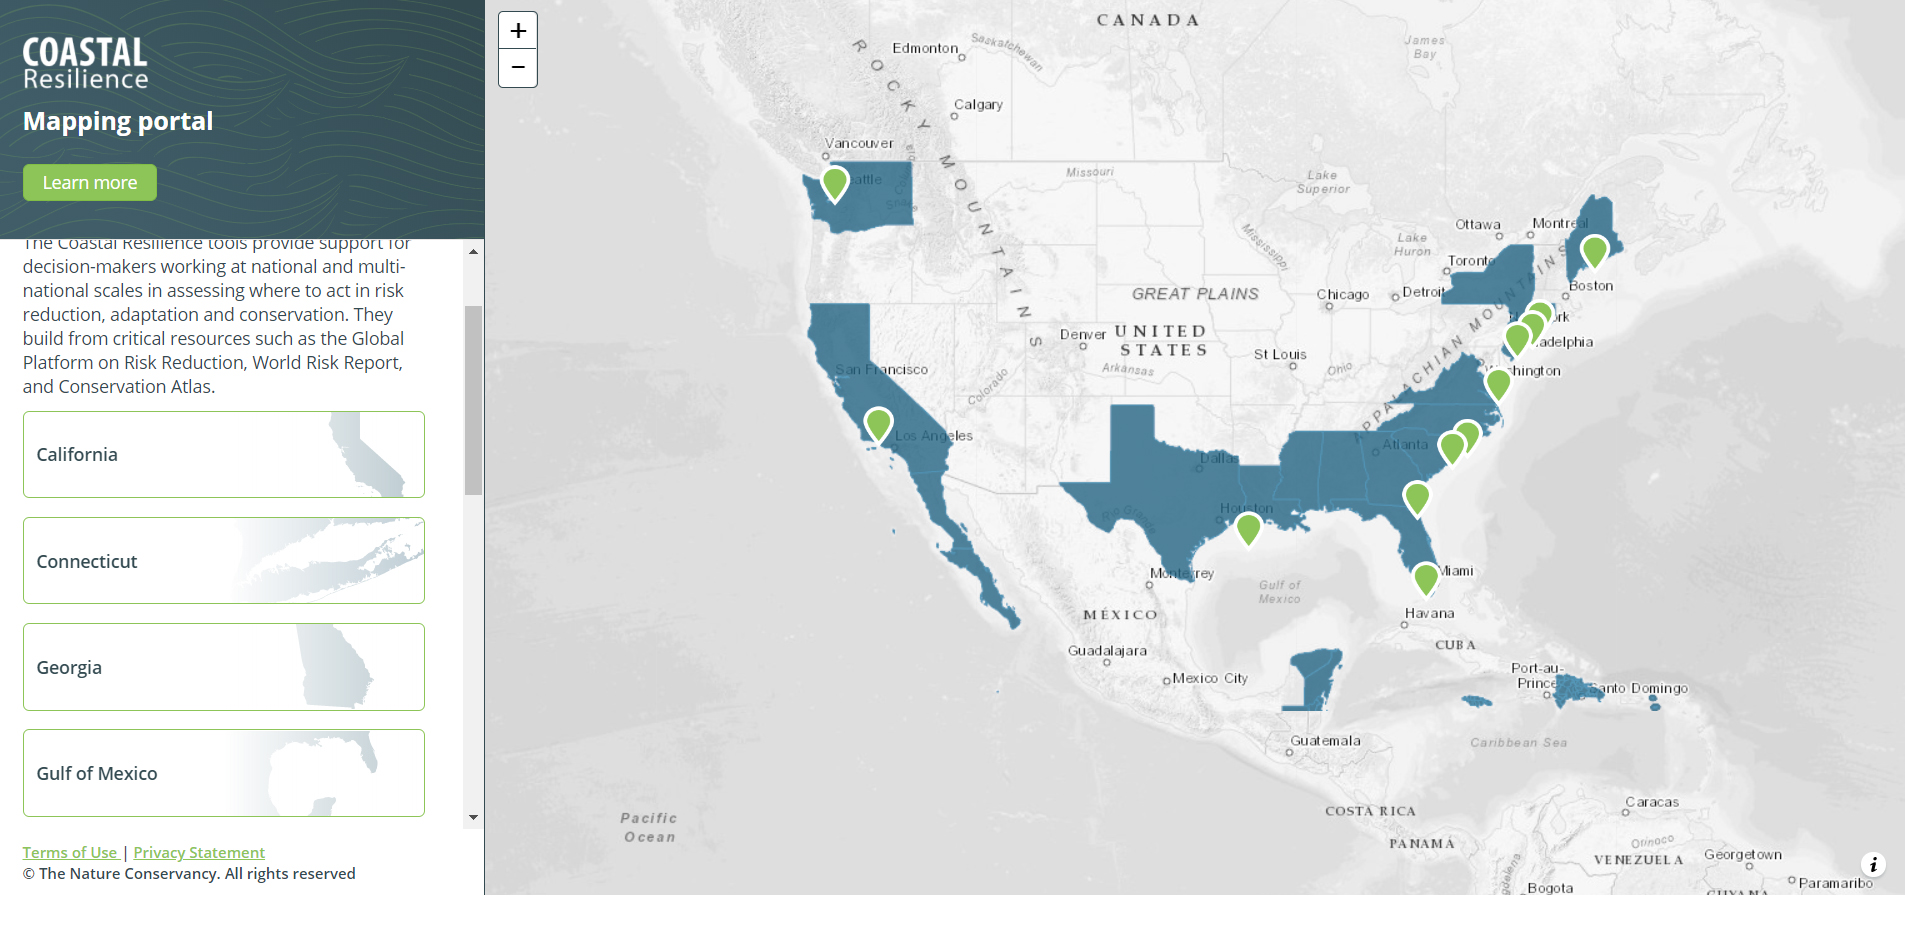 A screenshot of the tool, Coastal Resilience Mapping Portal, being used.